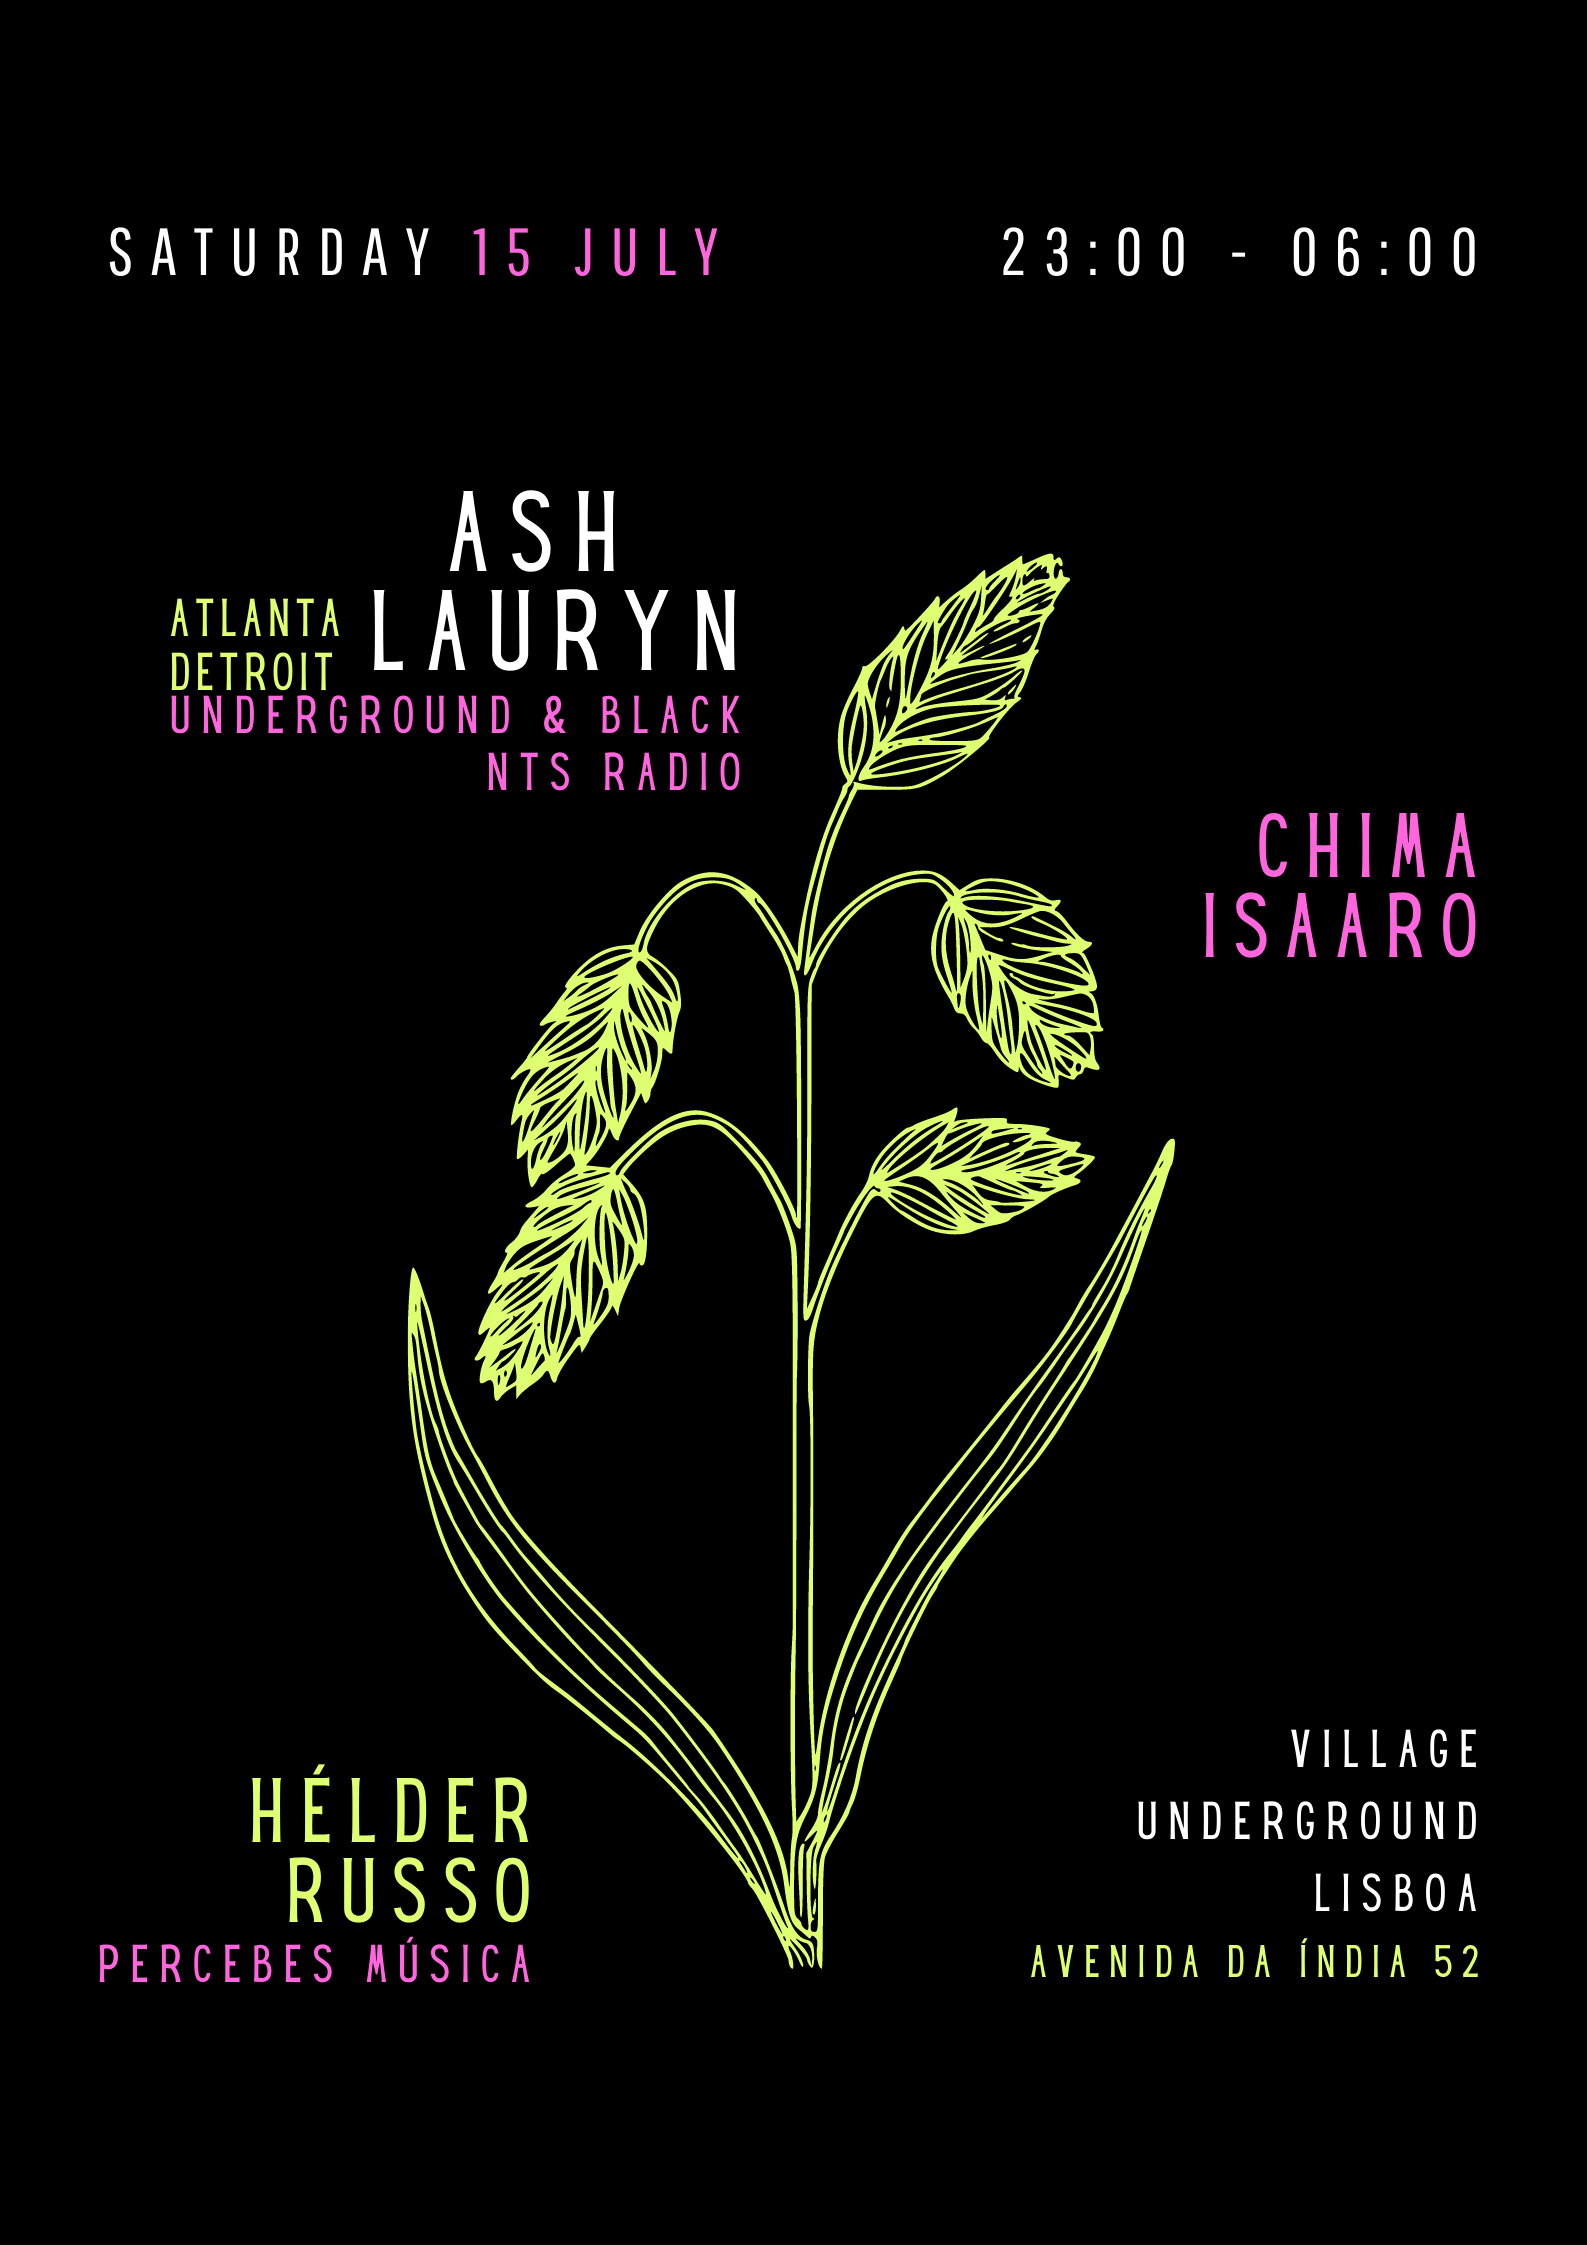 [CANCELLED] Ash Lauryn (US) + Chima Isaaro + Hélder Russo - フライヤー裏